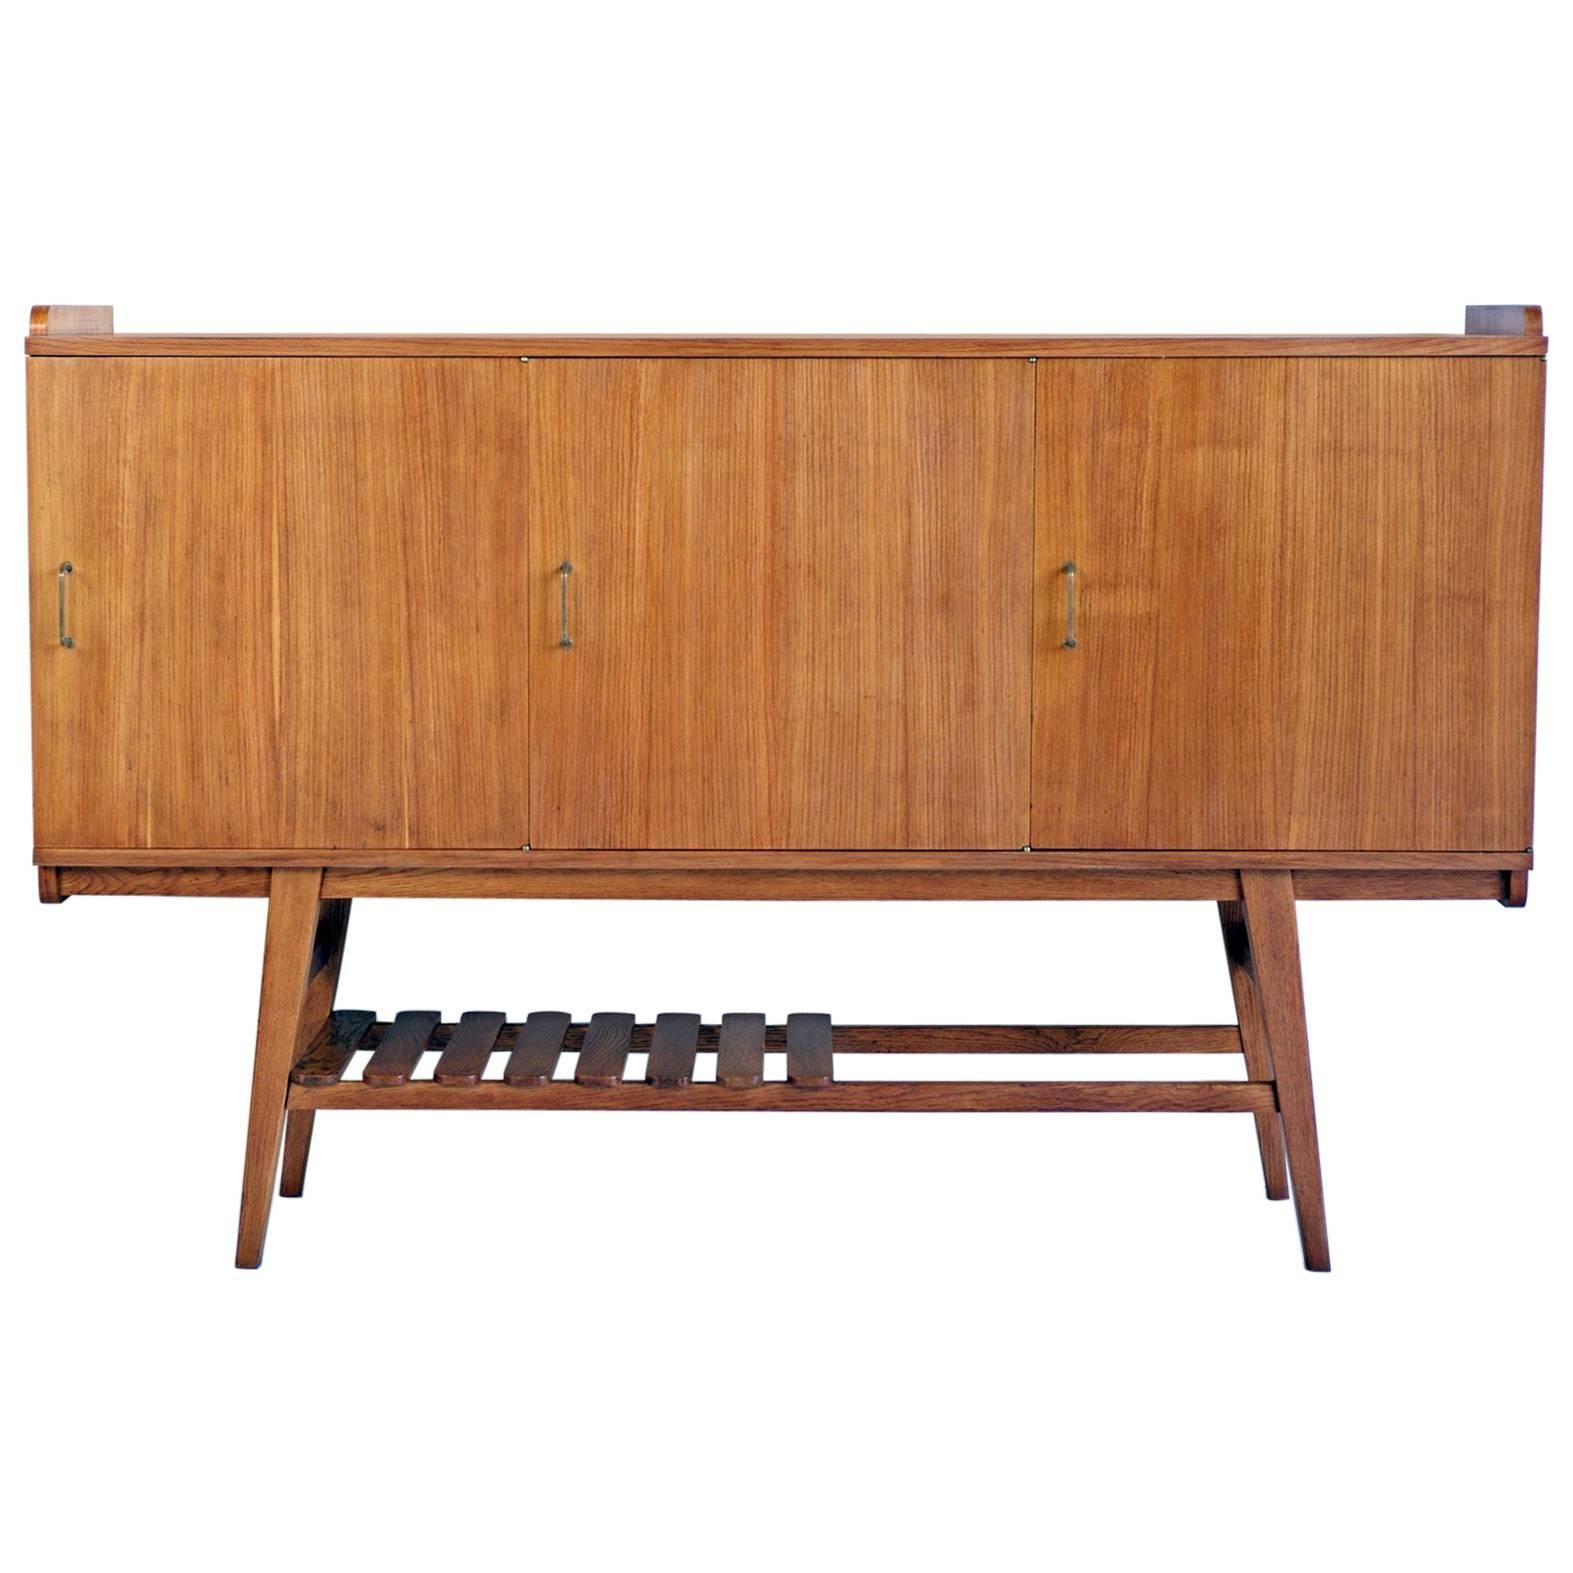 Sideboard by Jean-René Caillette for Georges Charron, France 1950